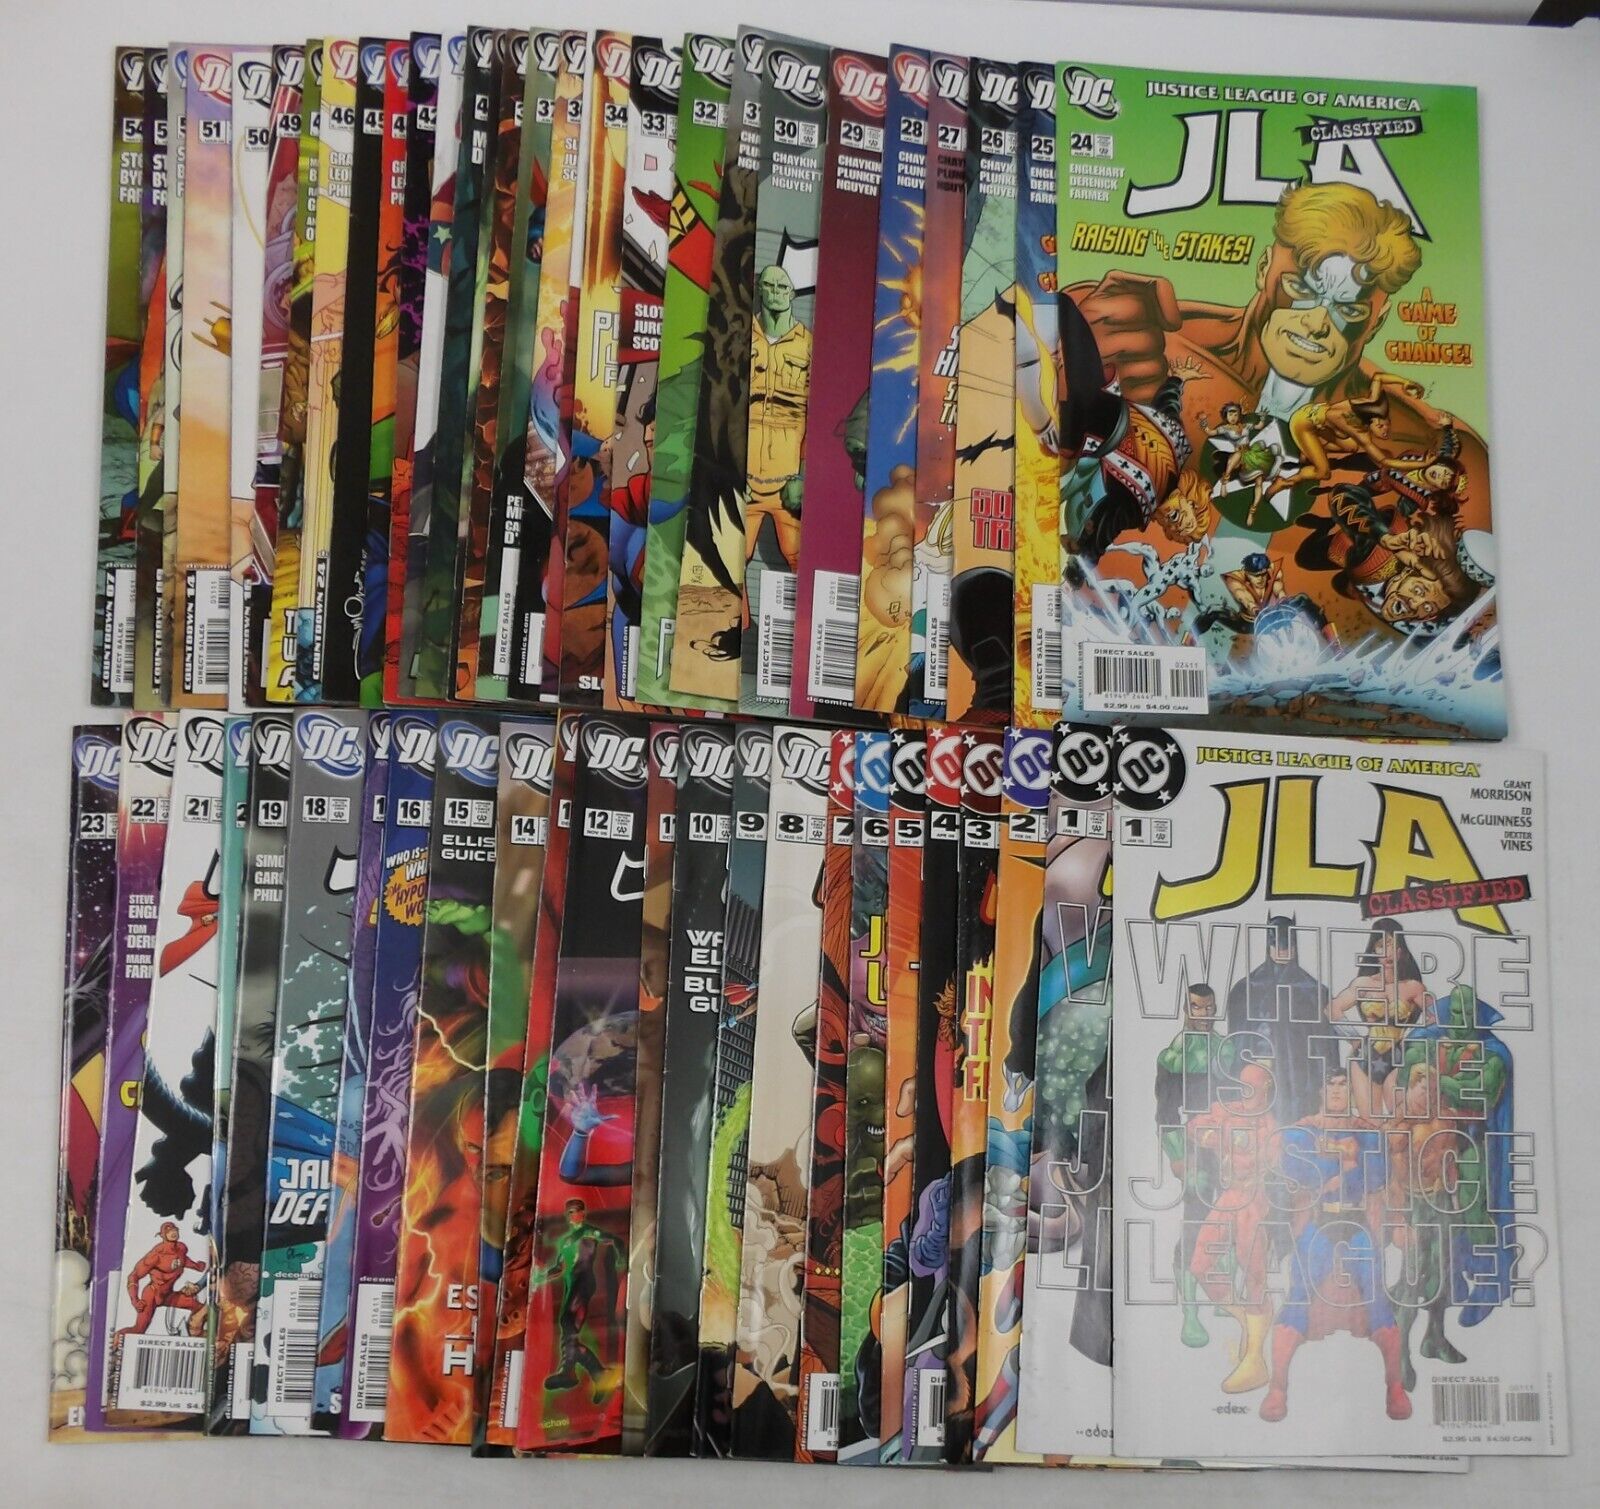 JLA Classified #1-54 VF/NM complete series + variant - Grant Morrison - DC